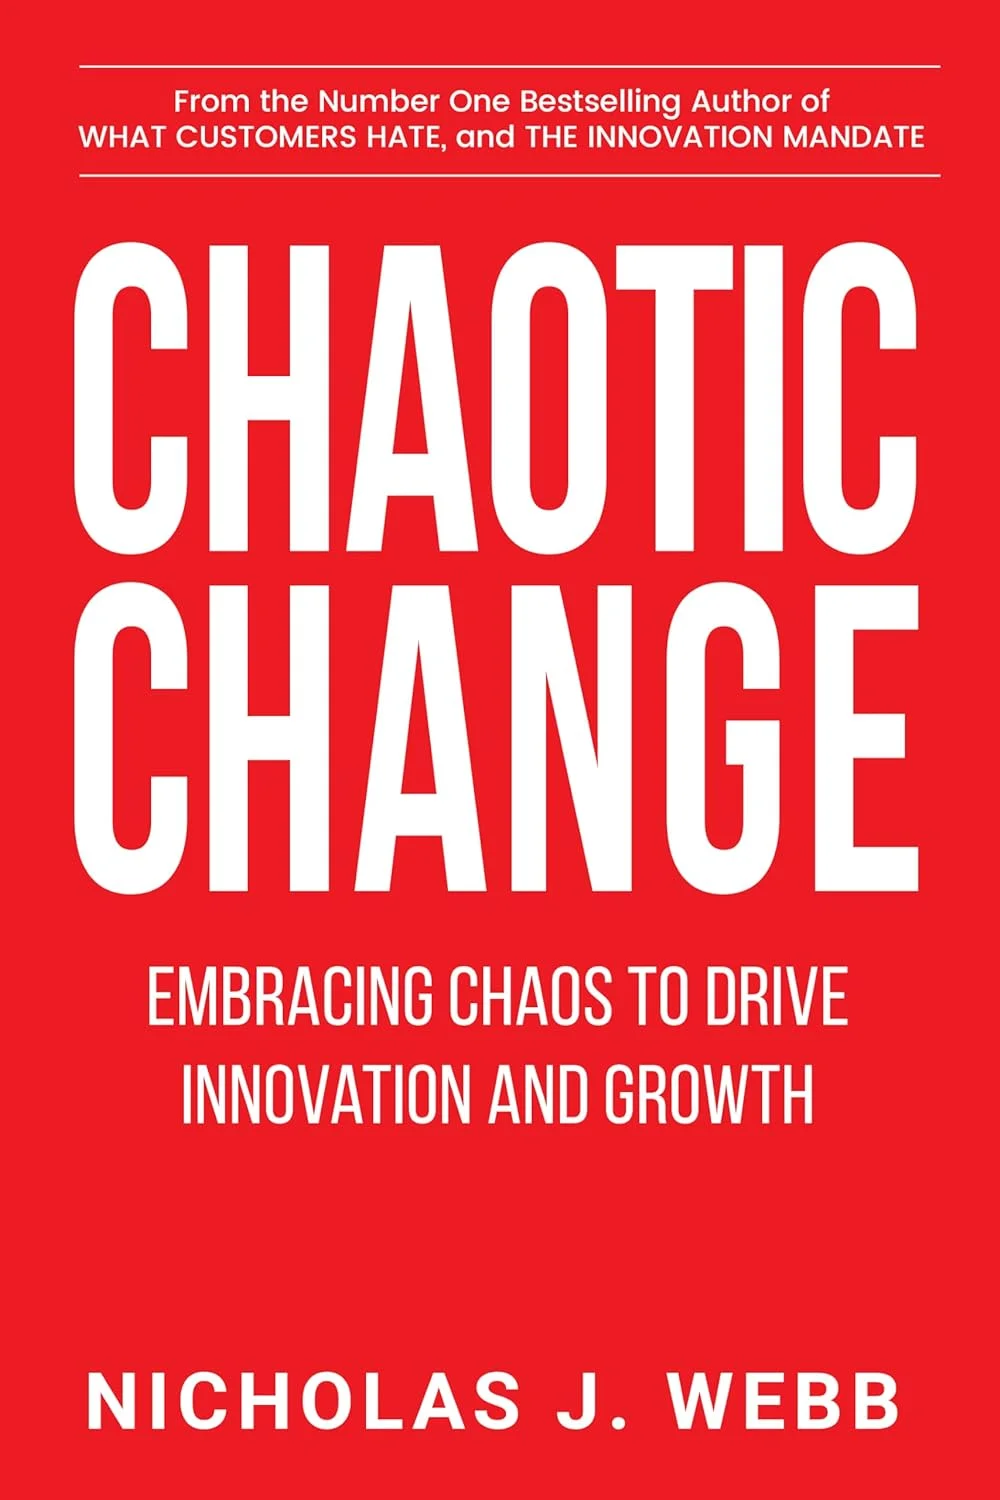 Chaotic Change: Embracing Chaos to Drive Innovation and Growth